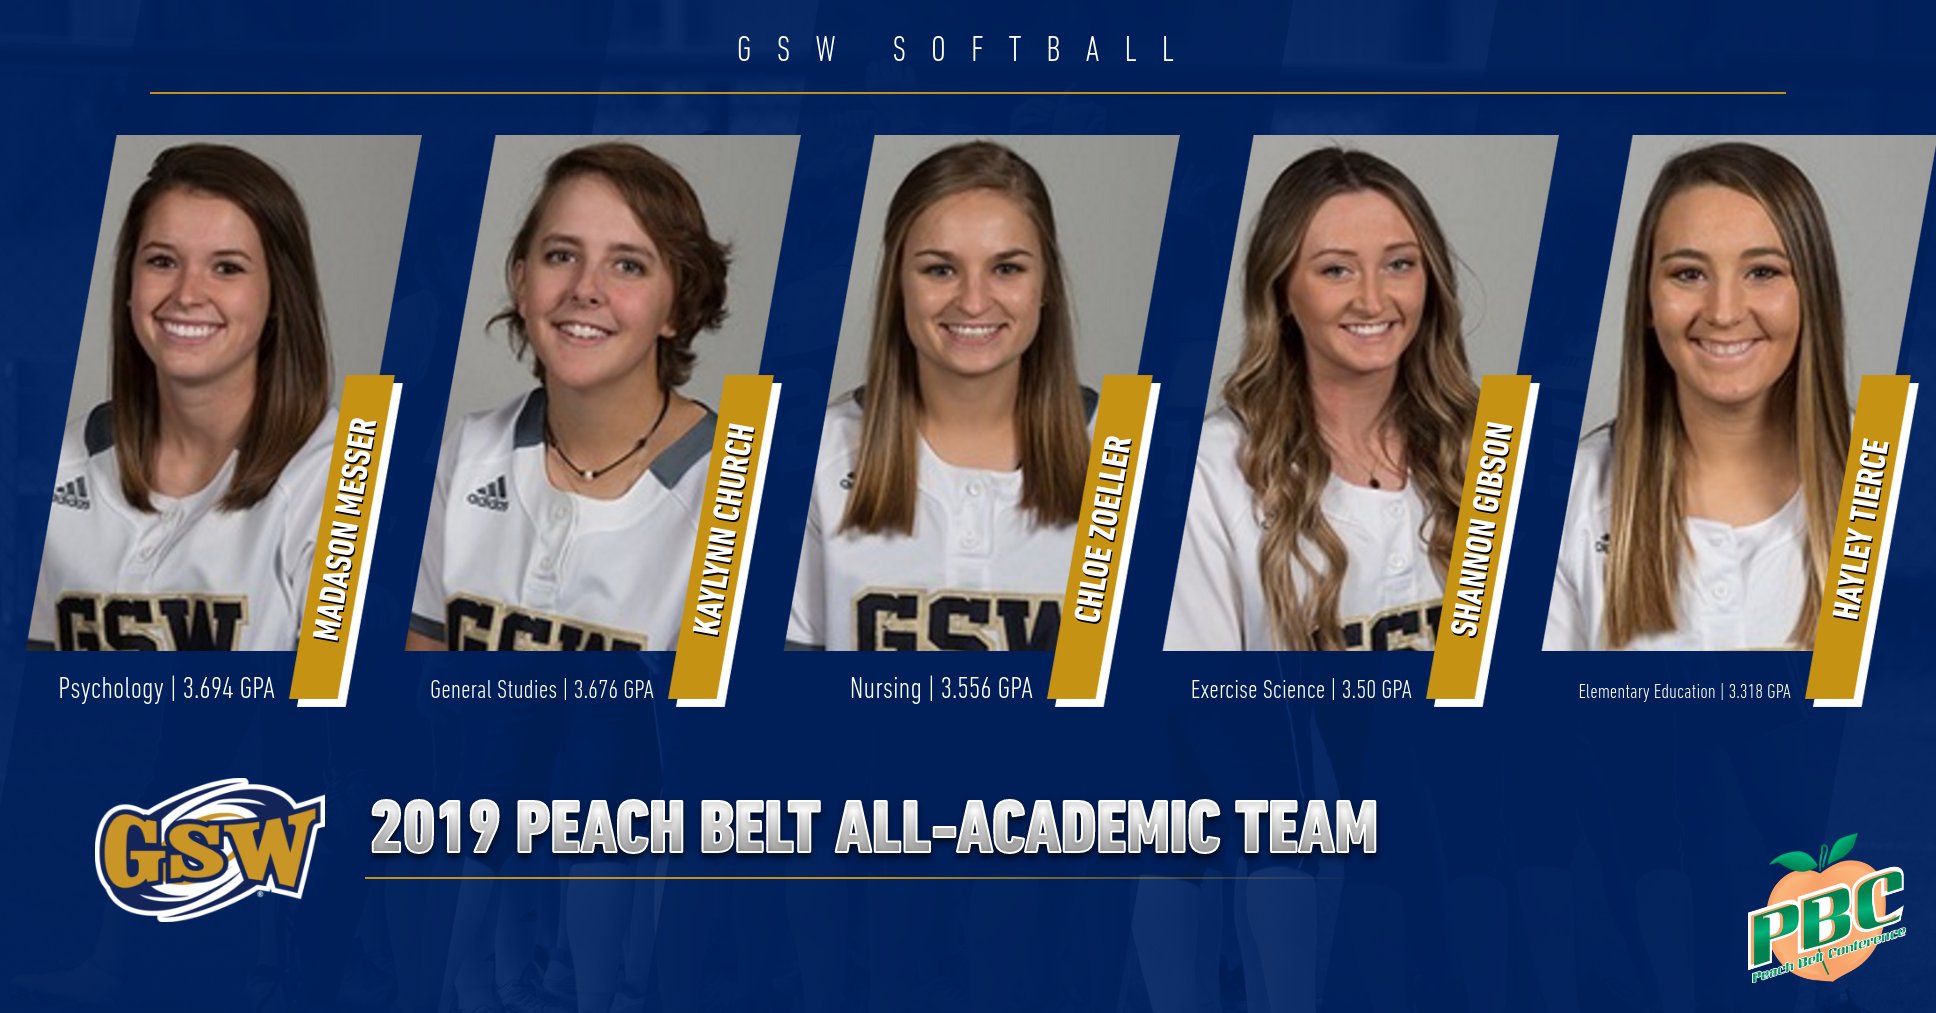 Five Lady Canes Named To PBC All-Academic Team